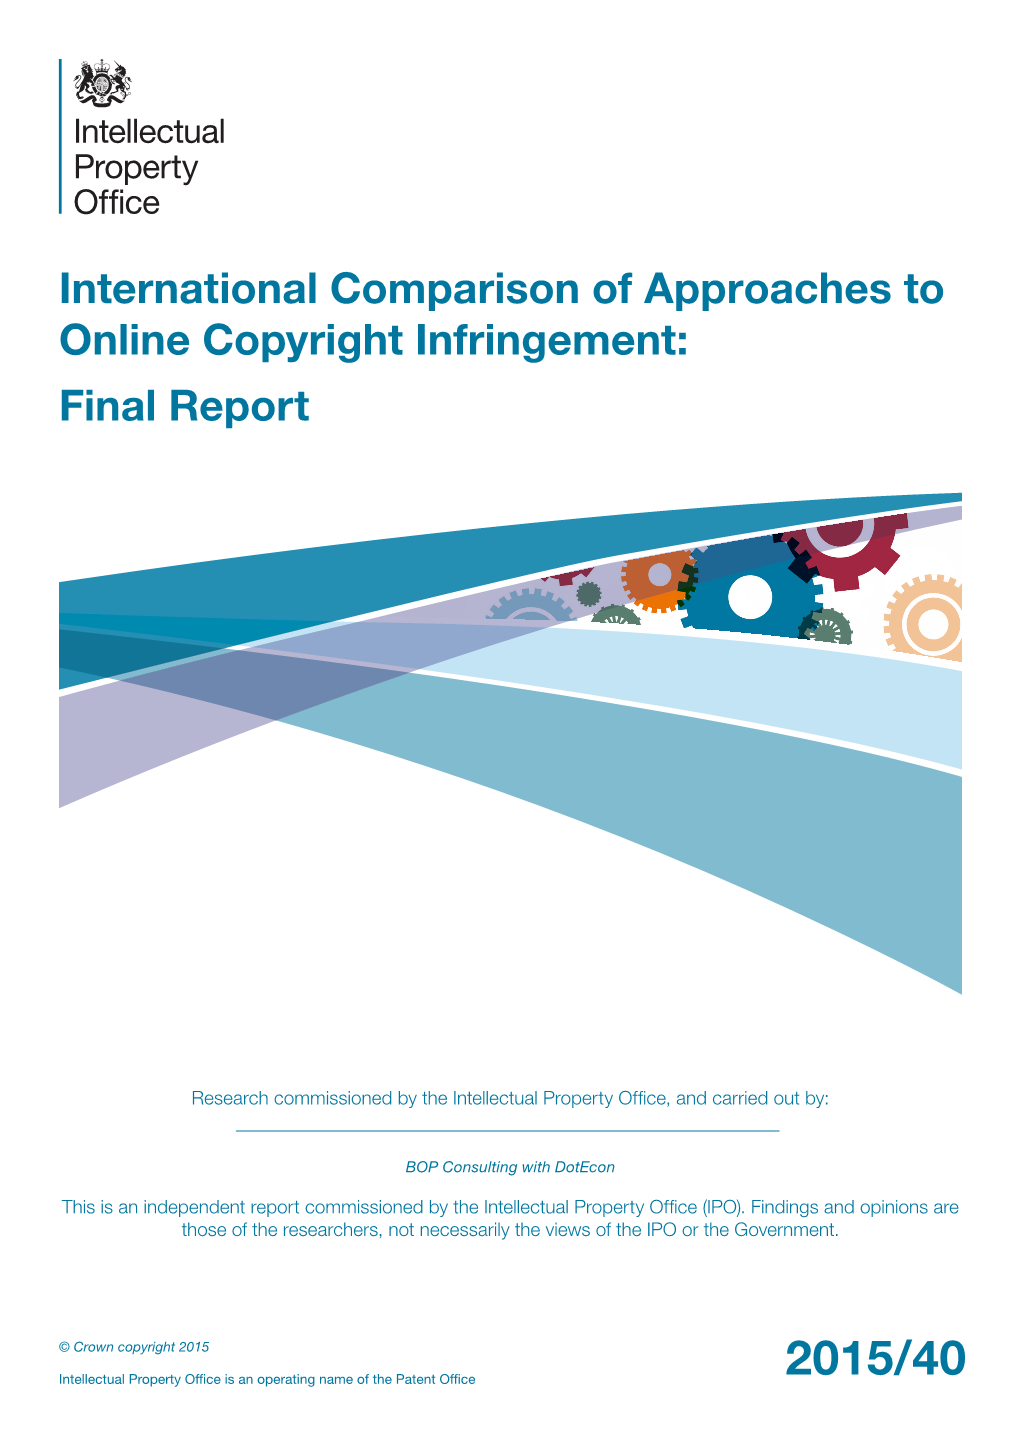 International Comparison of Approaches to Online Copyright Infringement: Final Report